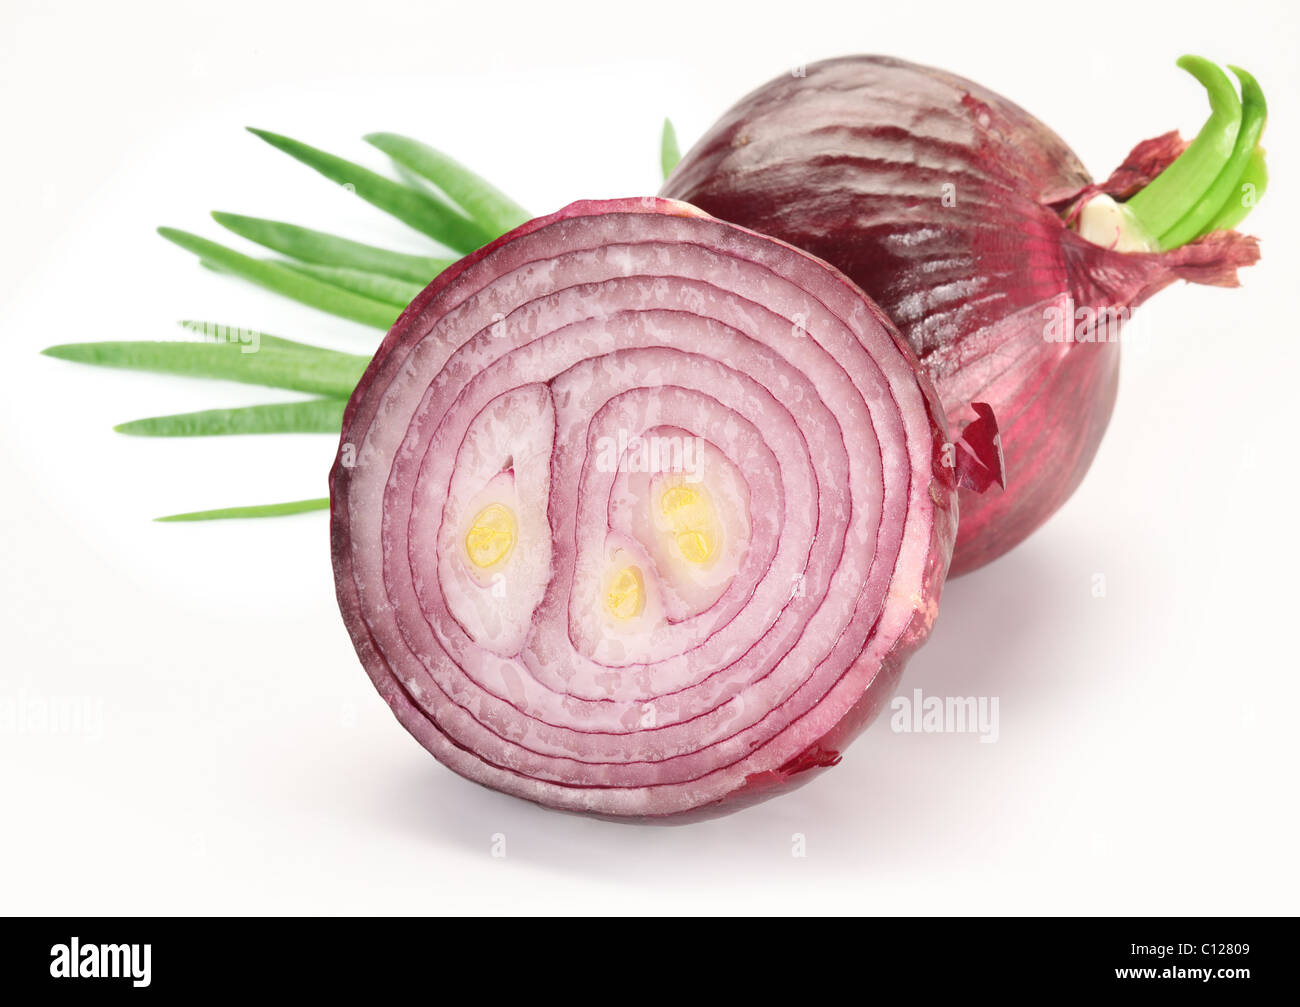 Bulbs of red onion with green leaves on a white background. Stock Photo